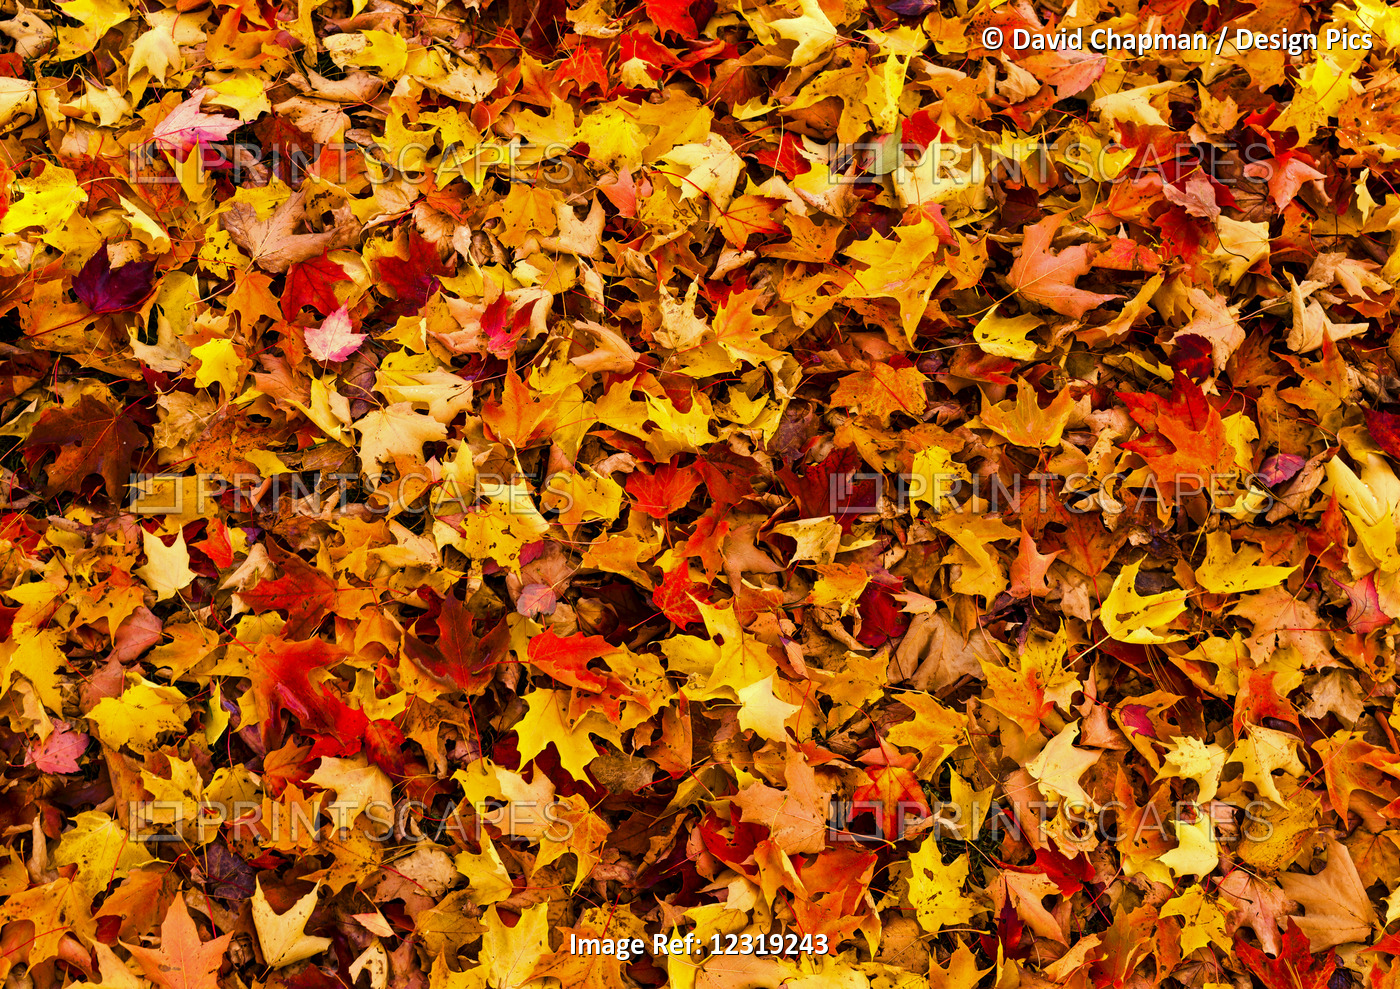 Carpet of brightly colored Autumn leaves